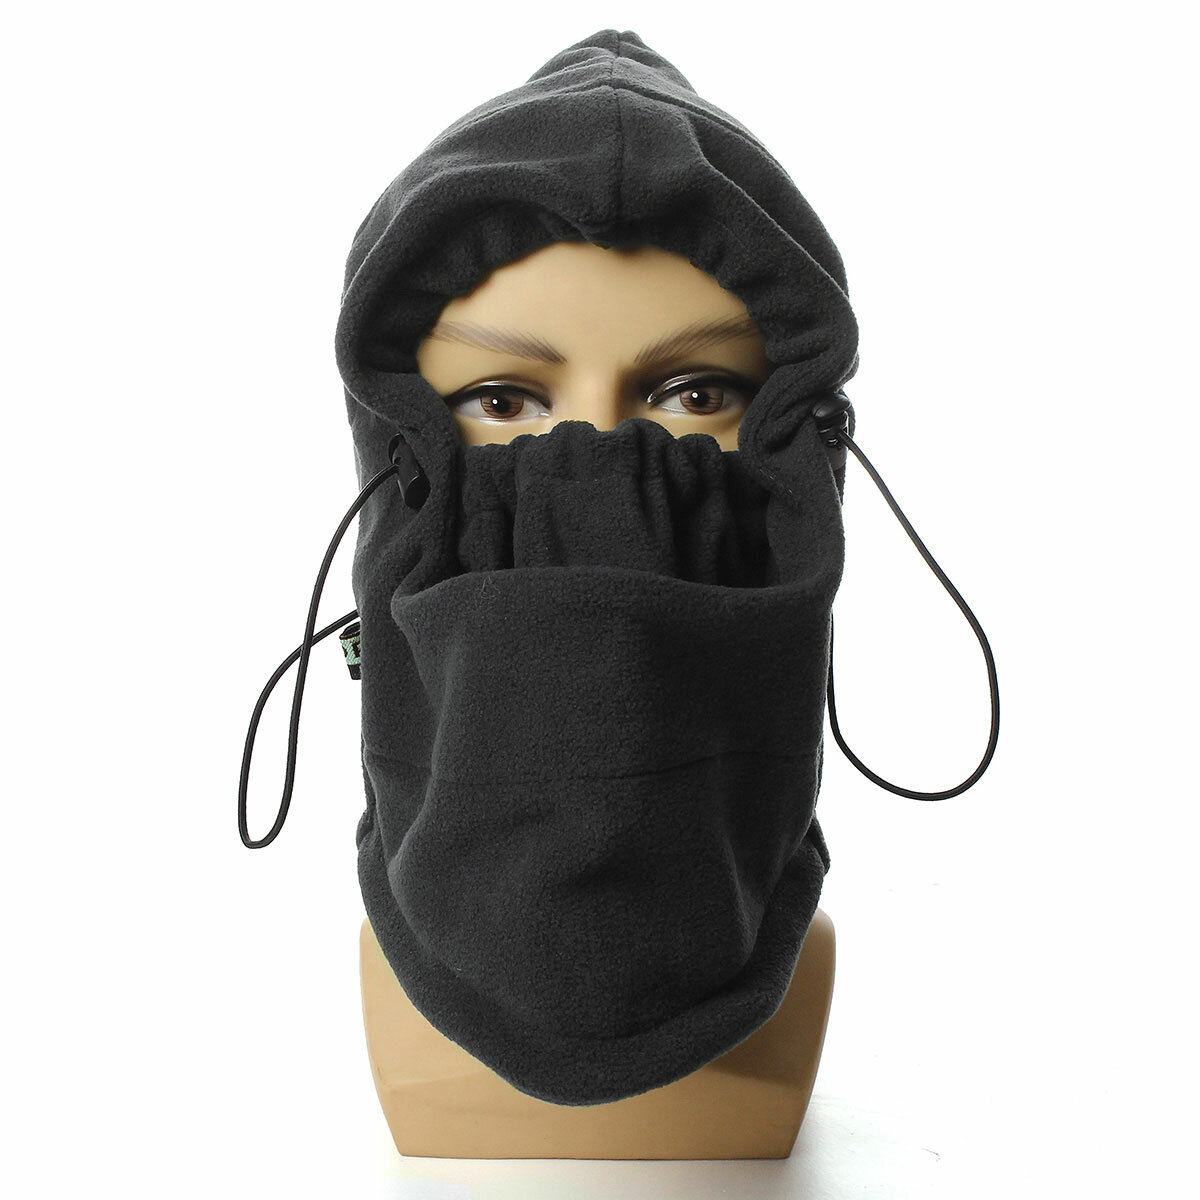 Winter Balaclava Hat Warm Neck Full Face Cover Ski Mask Scarf Beanie Hood Cap Outdoor Hiking Cycling